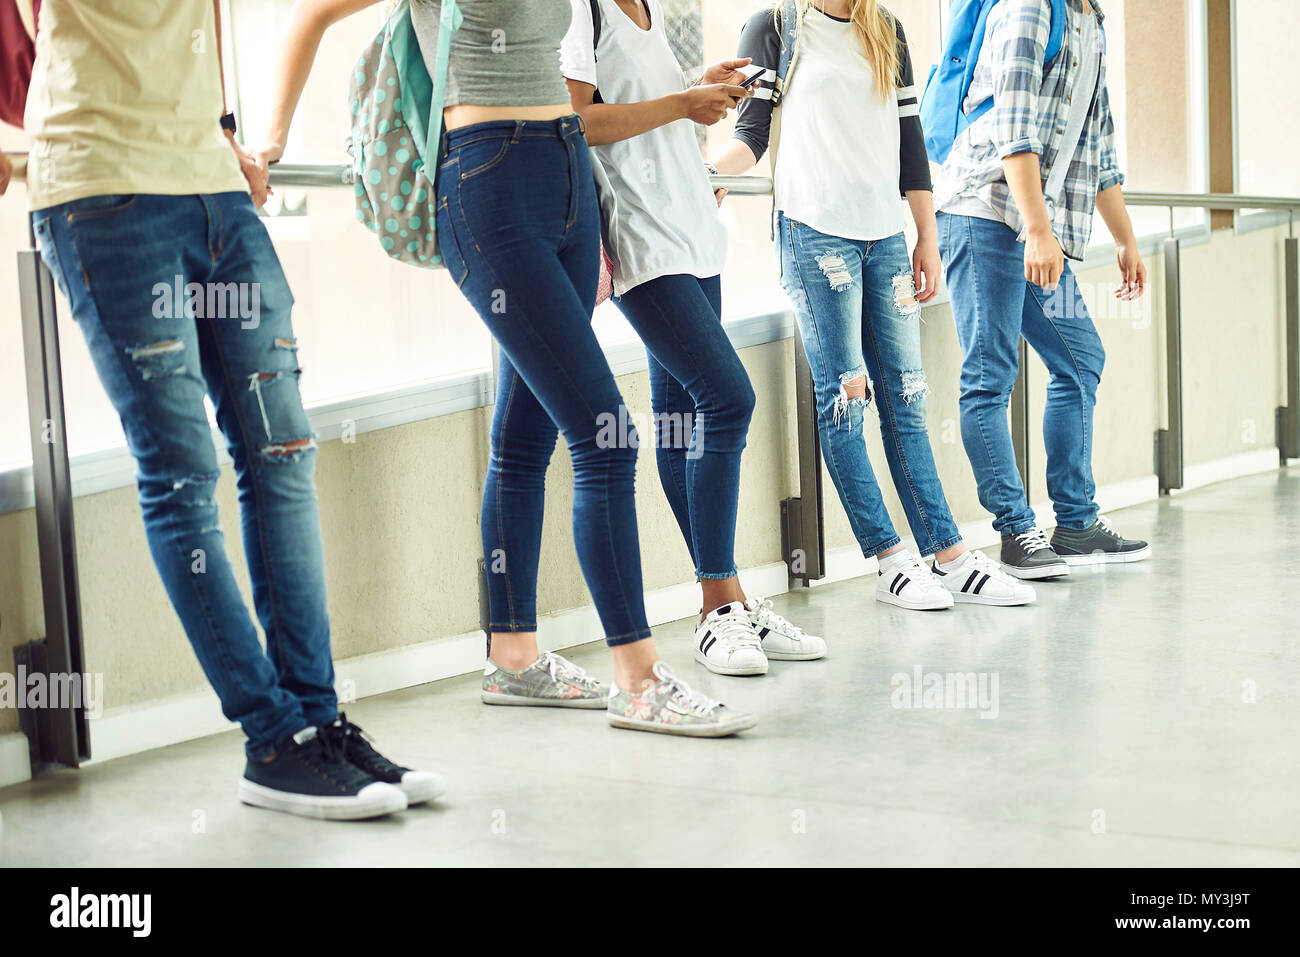 Casually dressed students leaning against railing in school corridor between classes Stock Photo